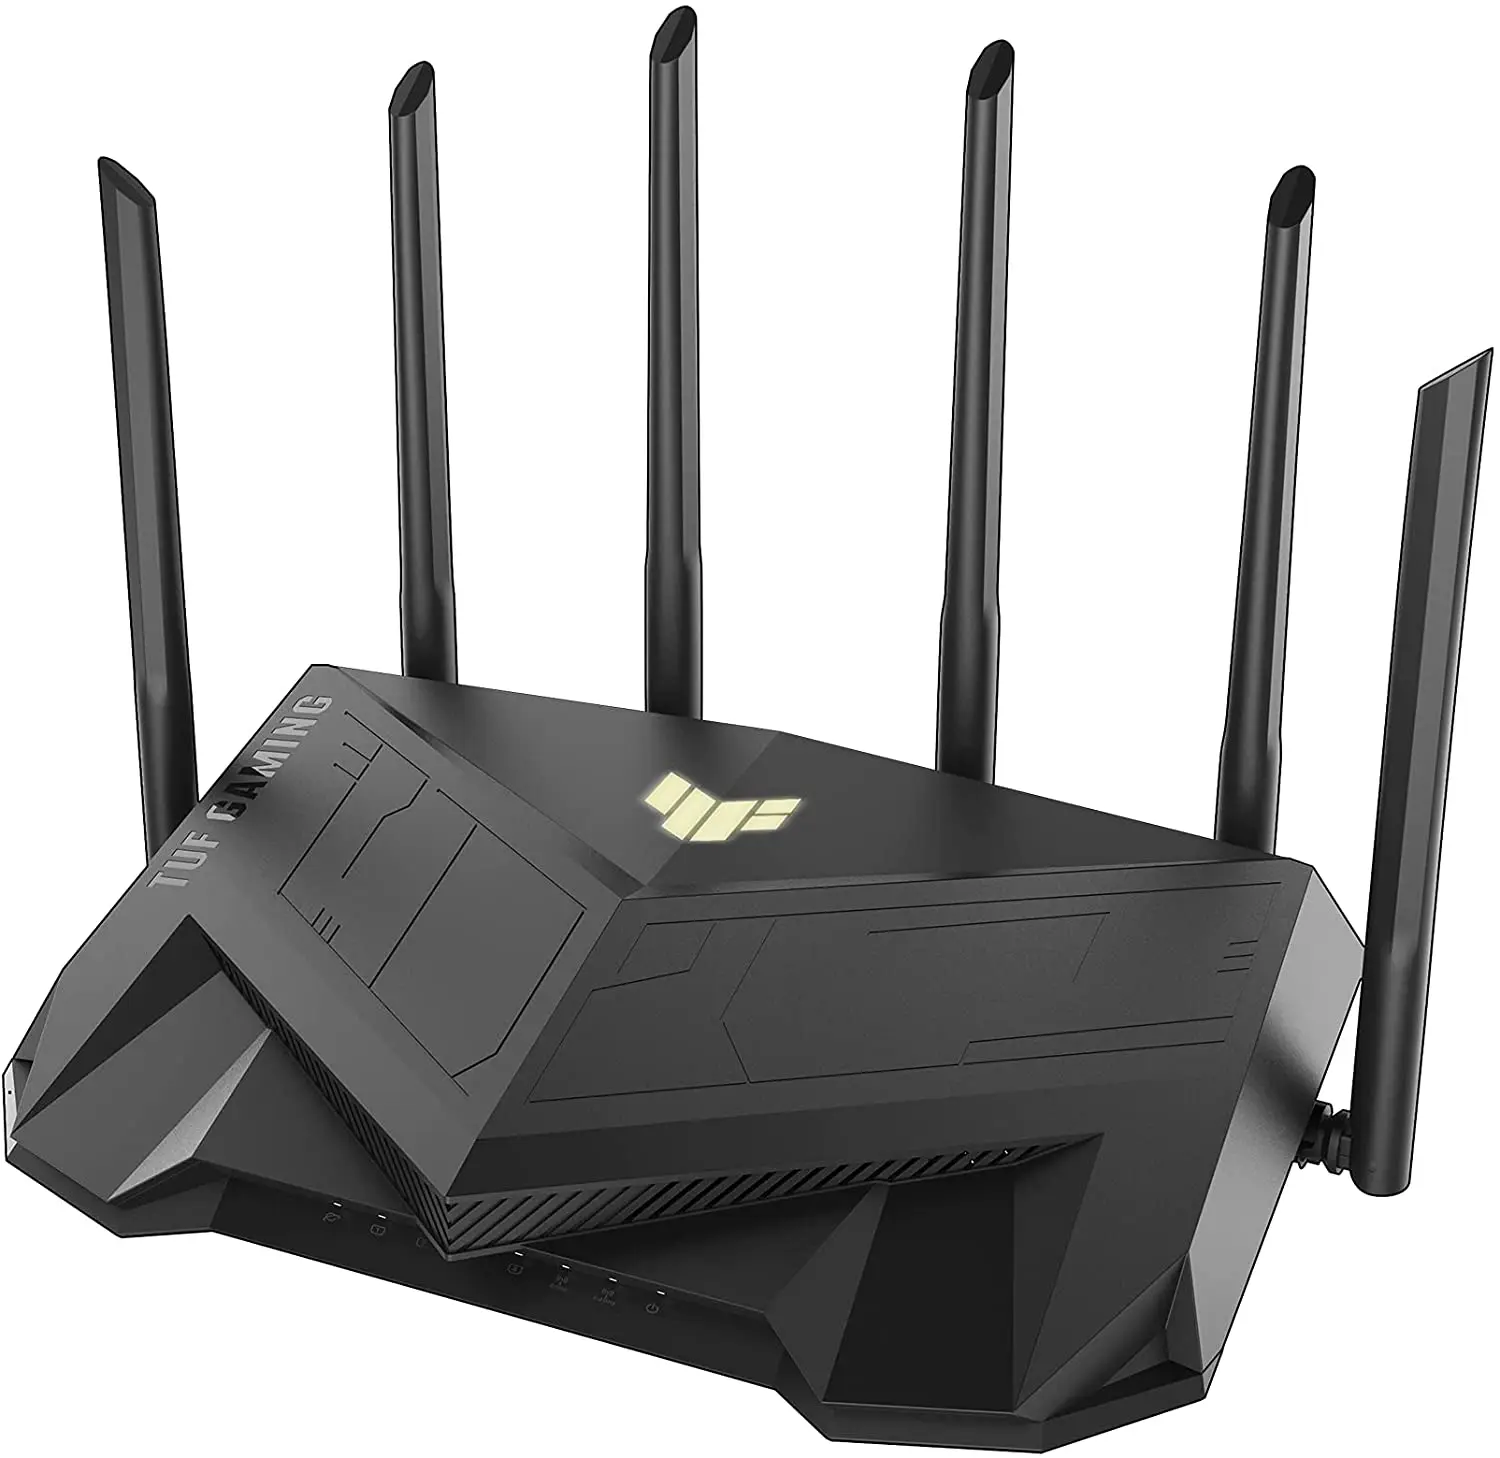 ASUS TUF Gaming Dual Band WiFi 6 Router, WiFi 6 802.11ax, Mobile Game Mode,Mesh WiFi support, Gaming Port, Gear Accelerator